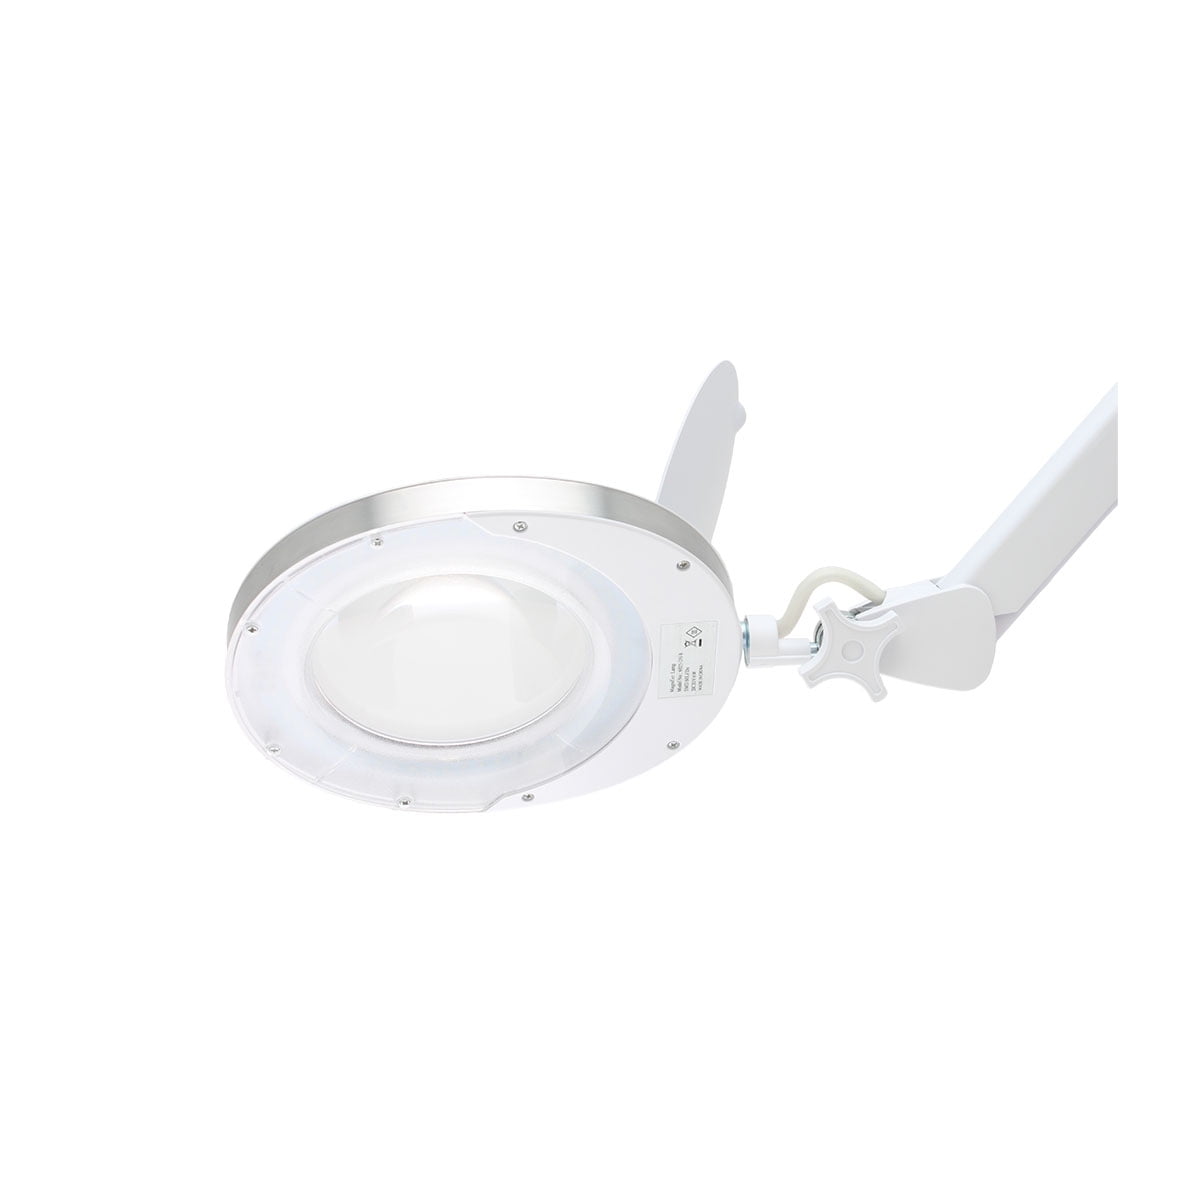 Aven ProVue SuperSlim LED Magnifying Lamp with 8 Diopter Lens & Heavy-Duty  Clamp, White